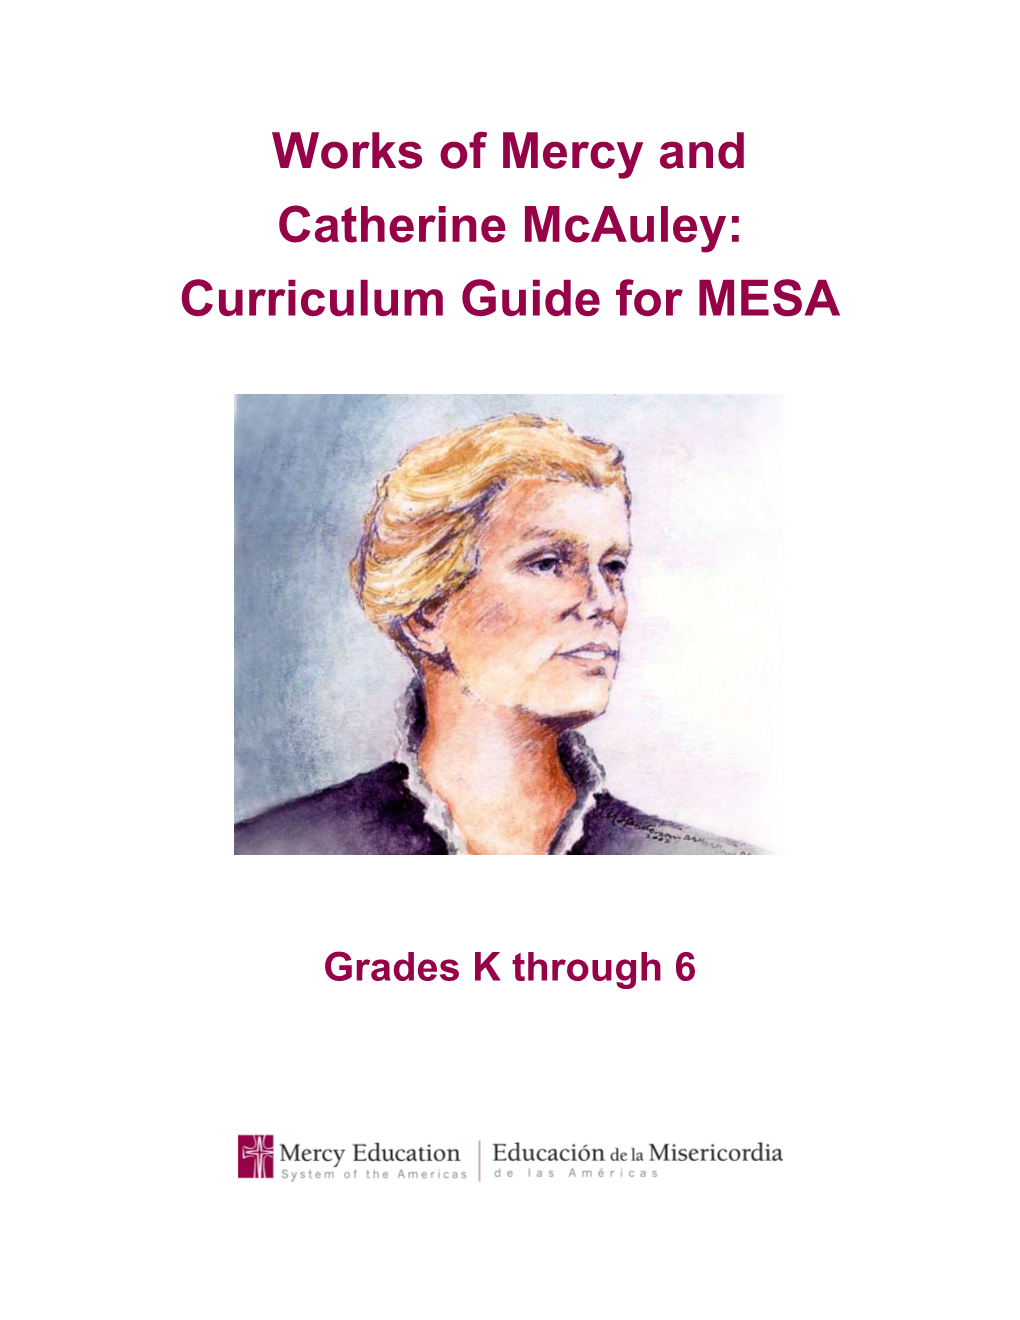 Works of Mercy and Catherine Mcauley: Curriculum Guide for MESA